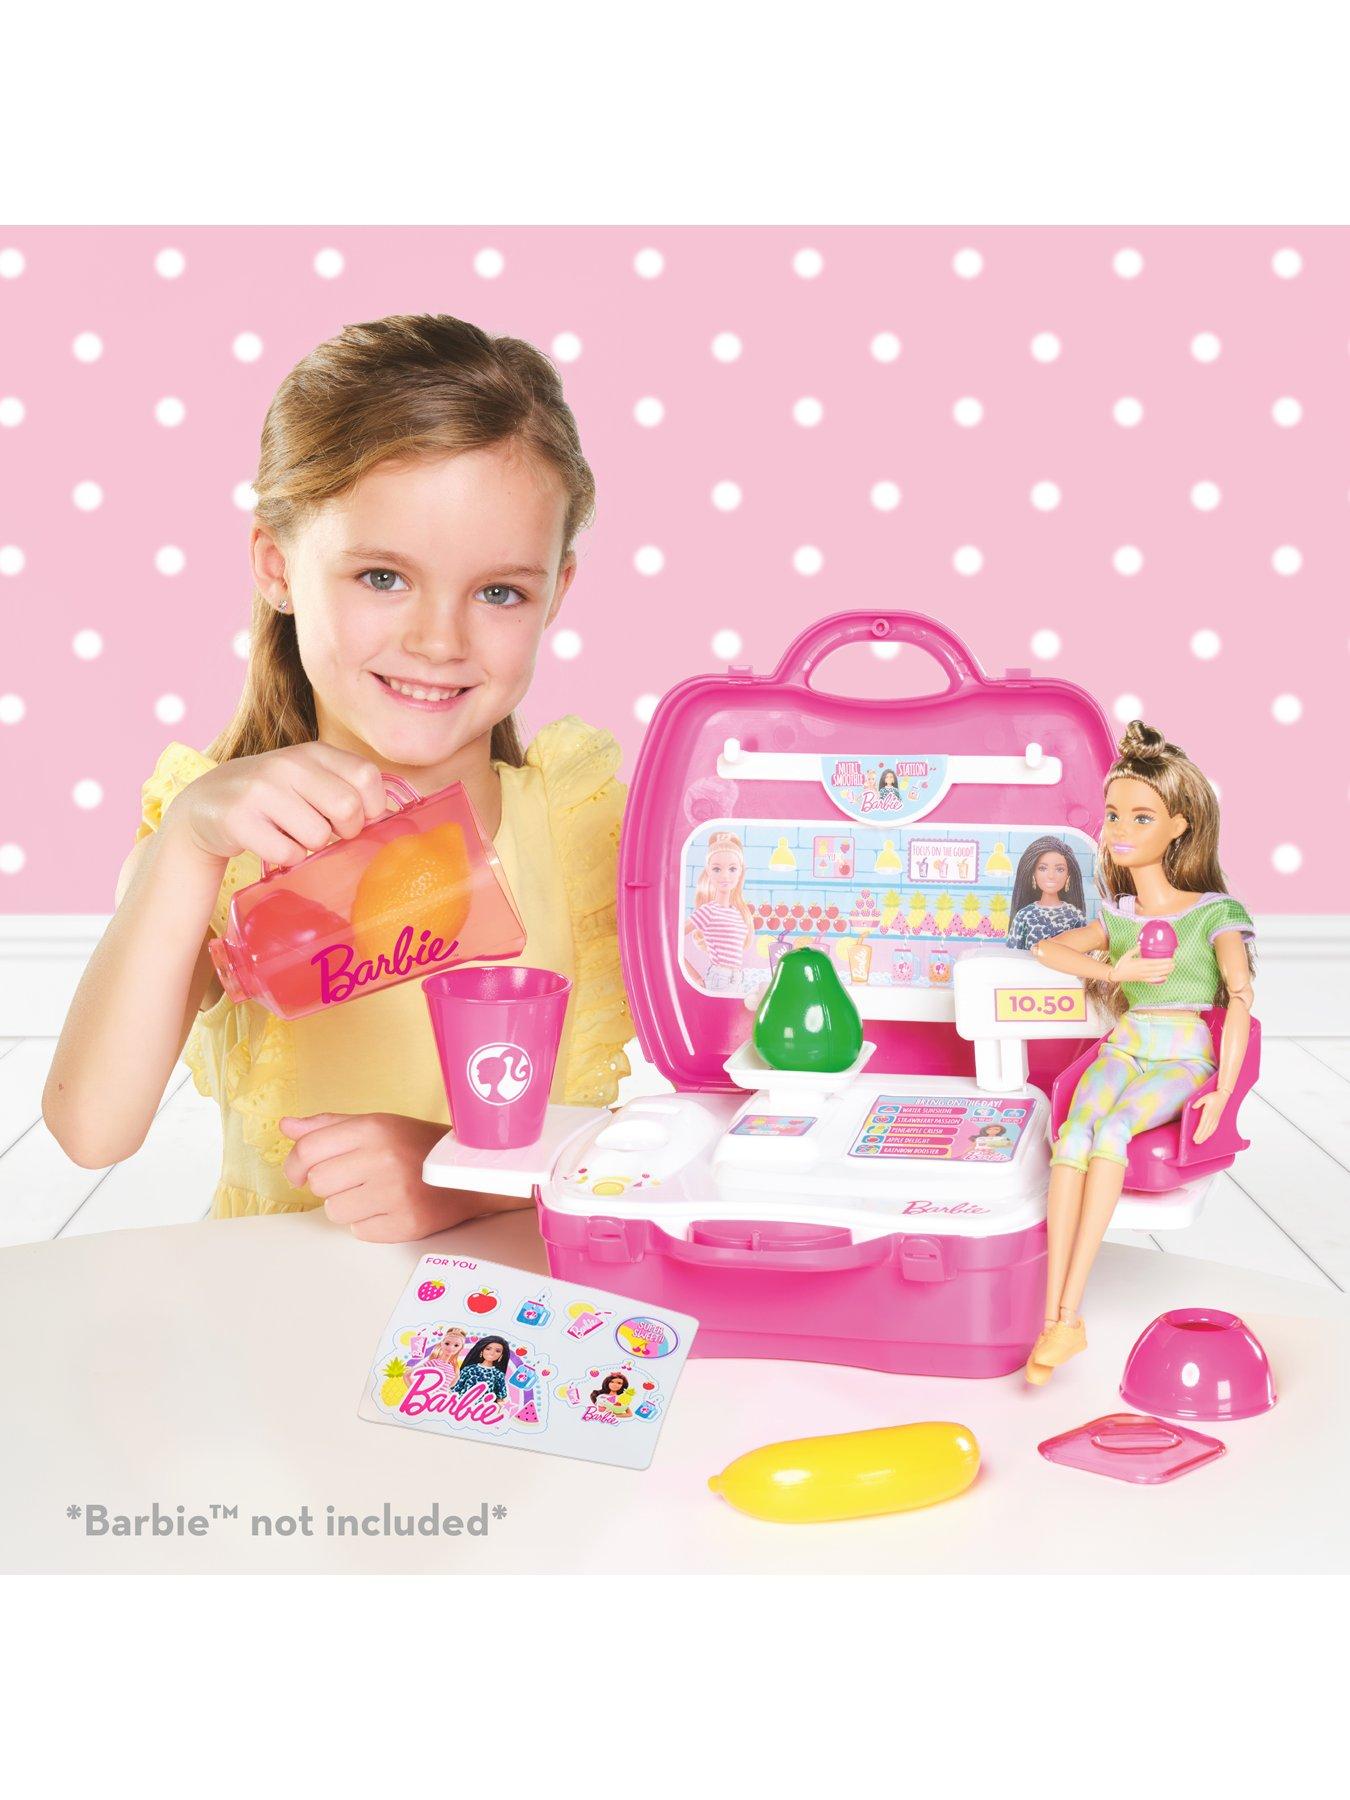 Kids Fashion Toy Children Makeup Pretend Playset Styling Head Doll  Hairstyle Beauty Game Hair Dryer Fun Dress Up Gift For Girls - Beauty &  Fashion Toys - AliExpress